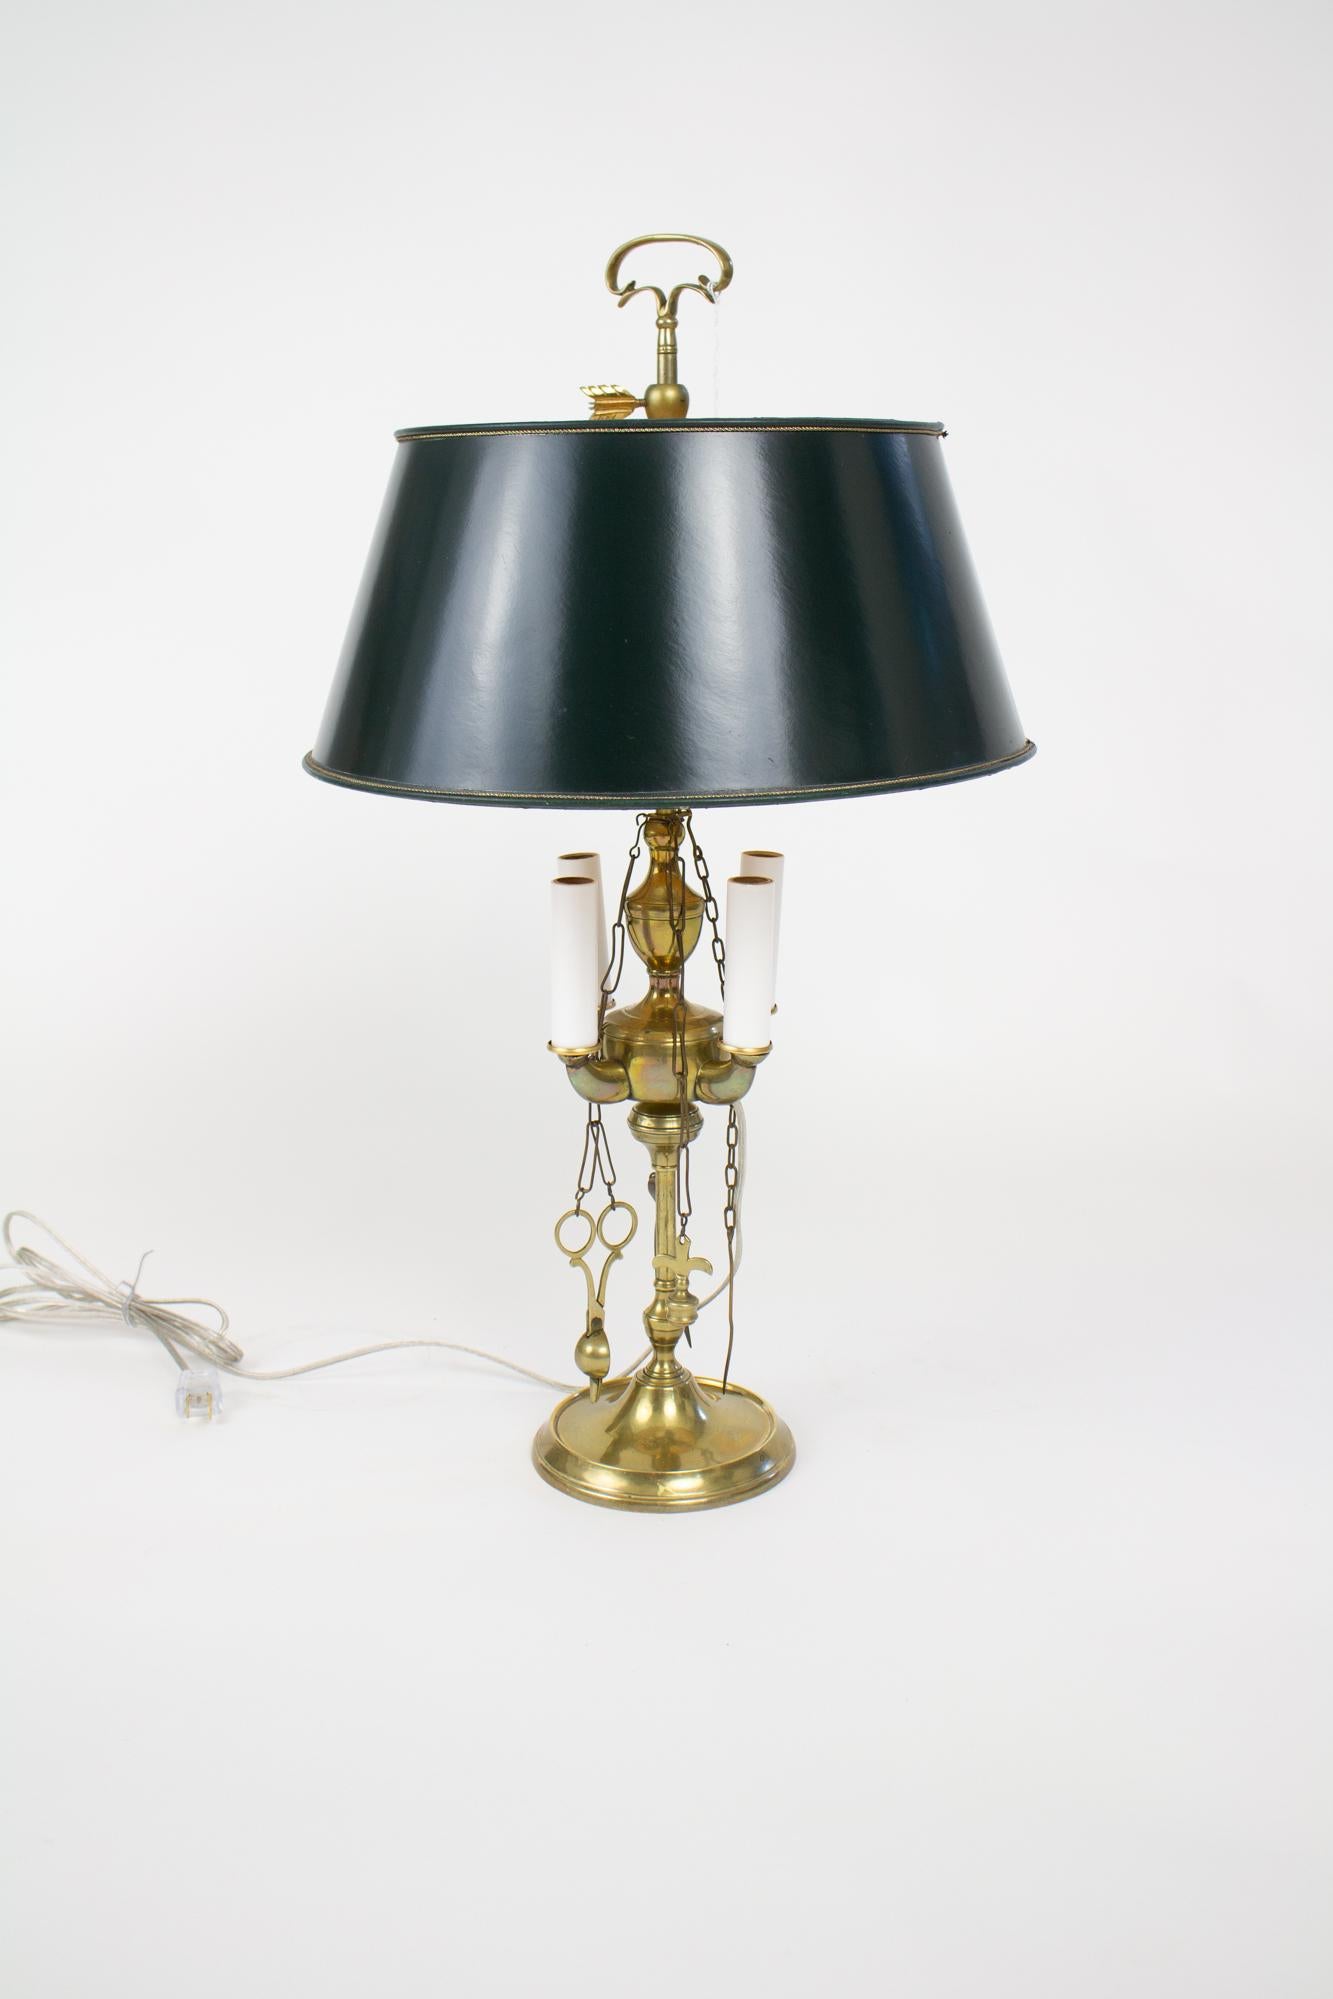 Early 19th century brass electrified lucerne whale oil lamp. A popular style of lamp in the late 18th-early 19th century, the lucerne burned whale oil or olive oil. From a central repository, there were four burners where a wick was placed. Hanging